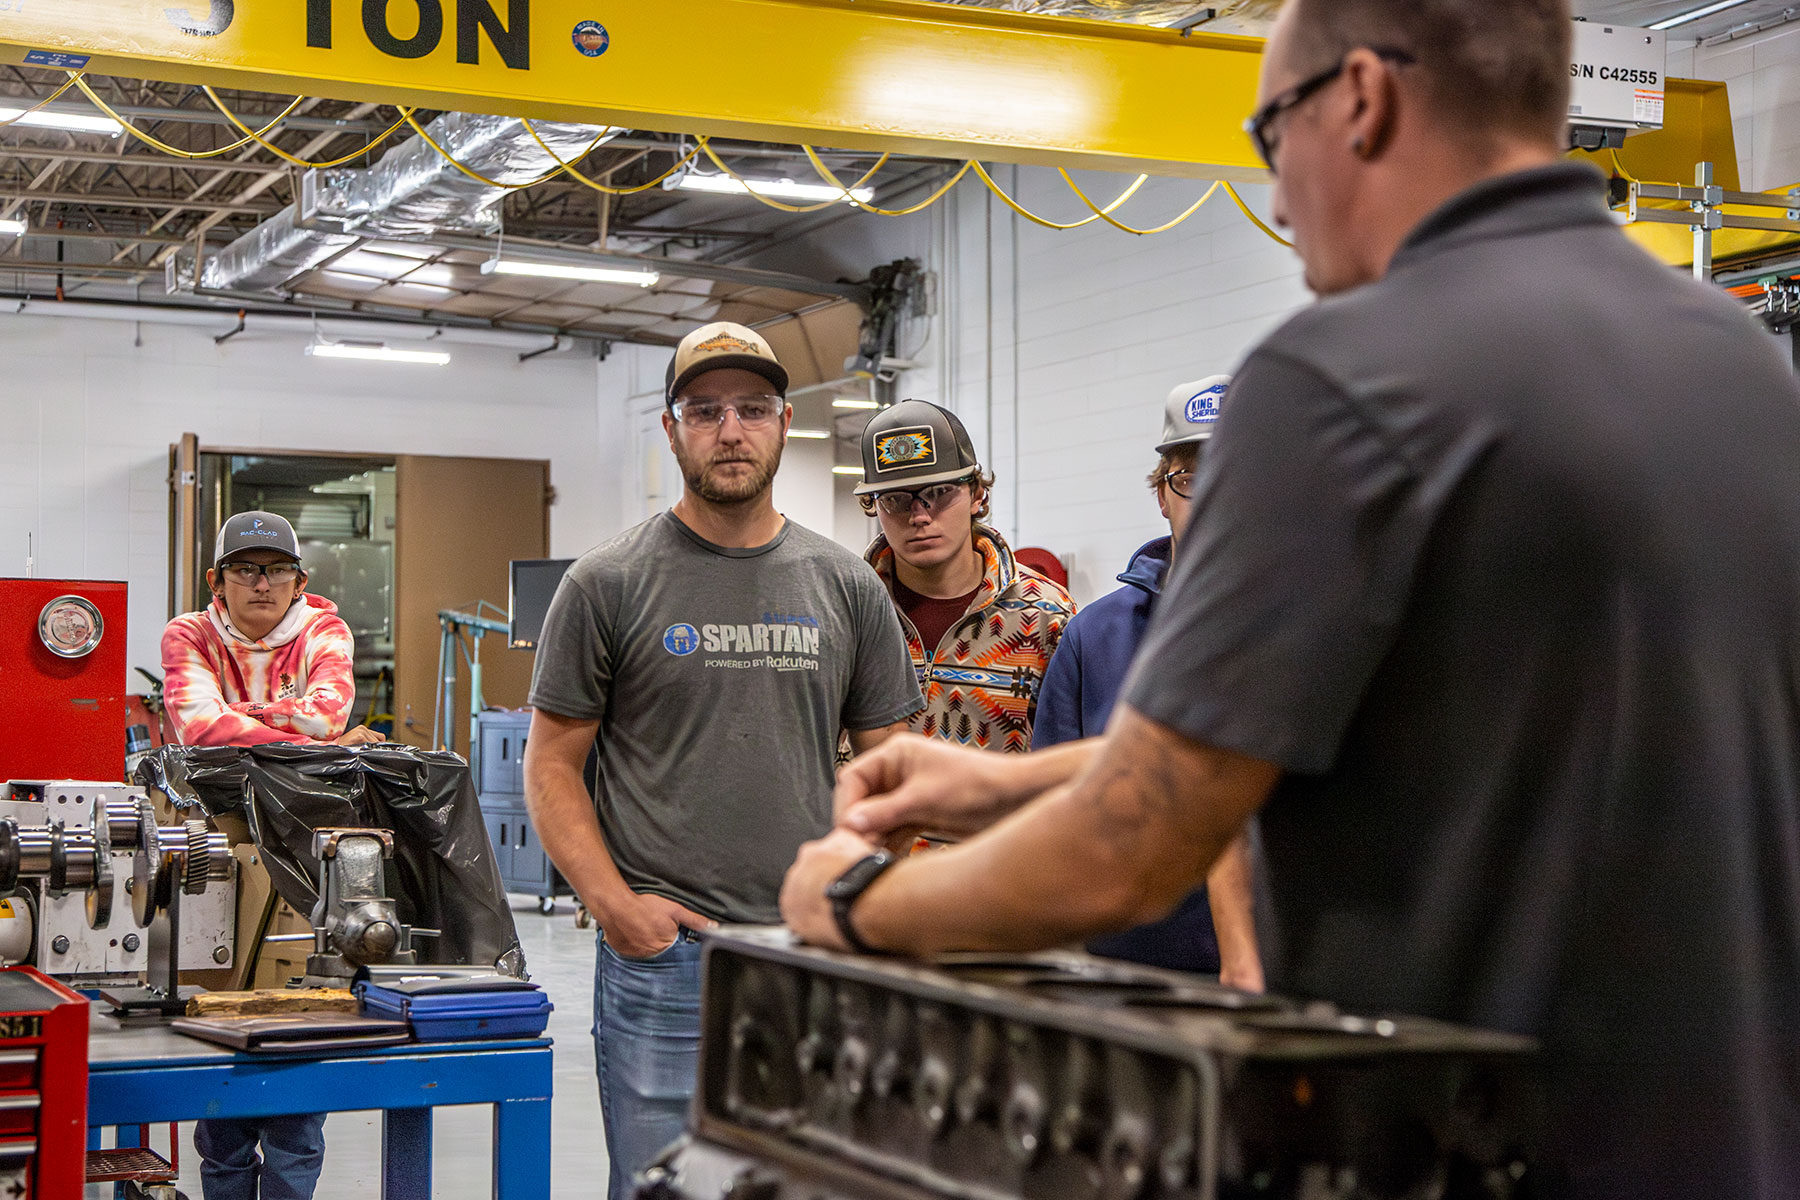 Sheridan College Diesel Technology instructor and students in class photo